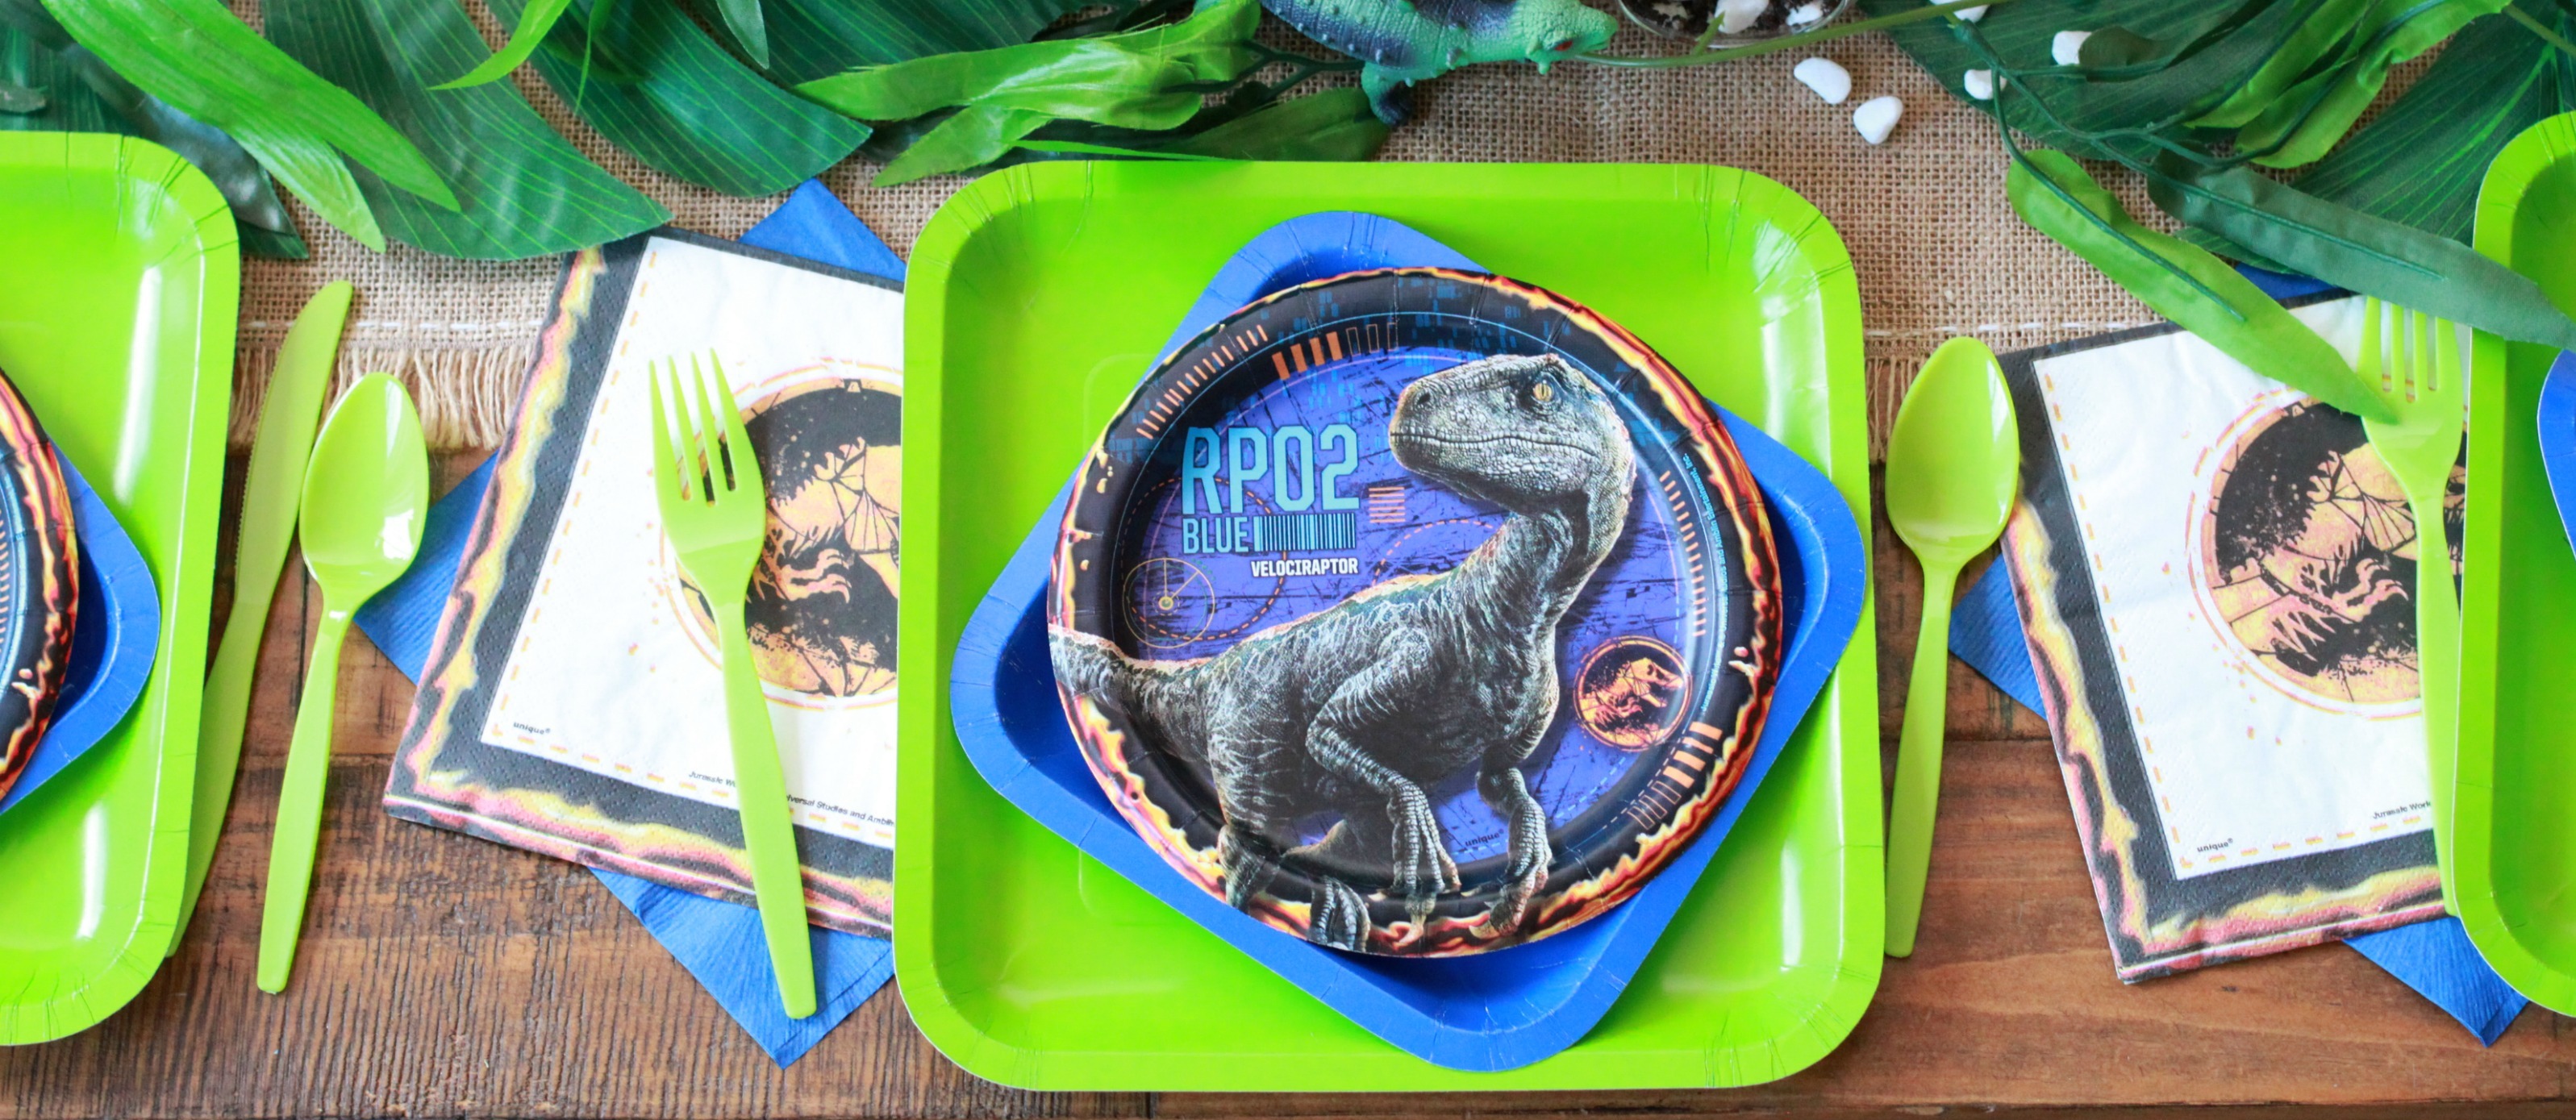 Home Garden Dinosaur Birthday Small Paper Plates Party Supplies Cake Dessert Jurassic 10 Greeting Cards Party Supply